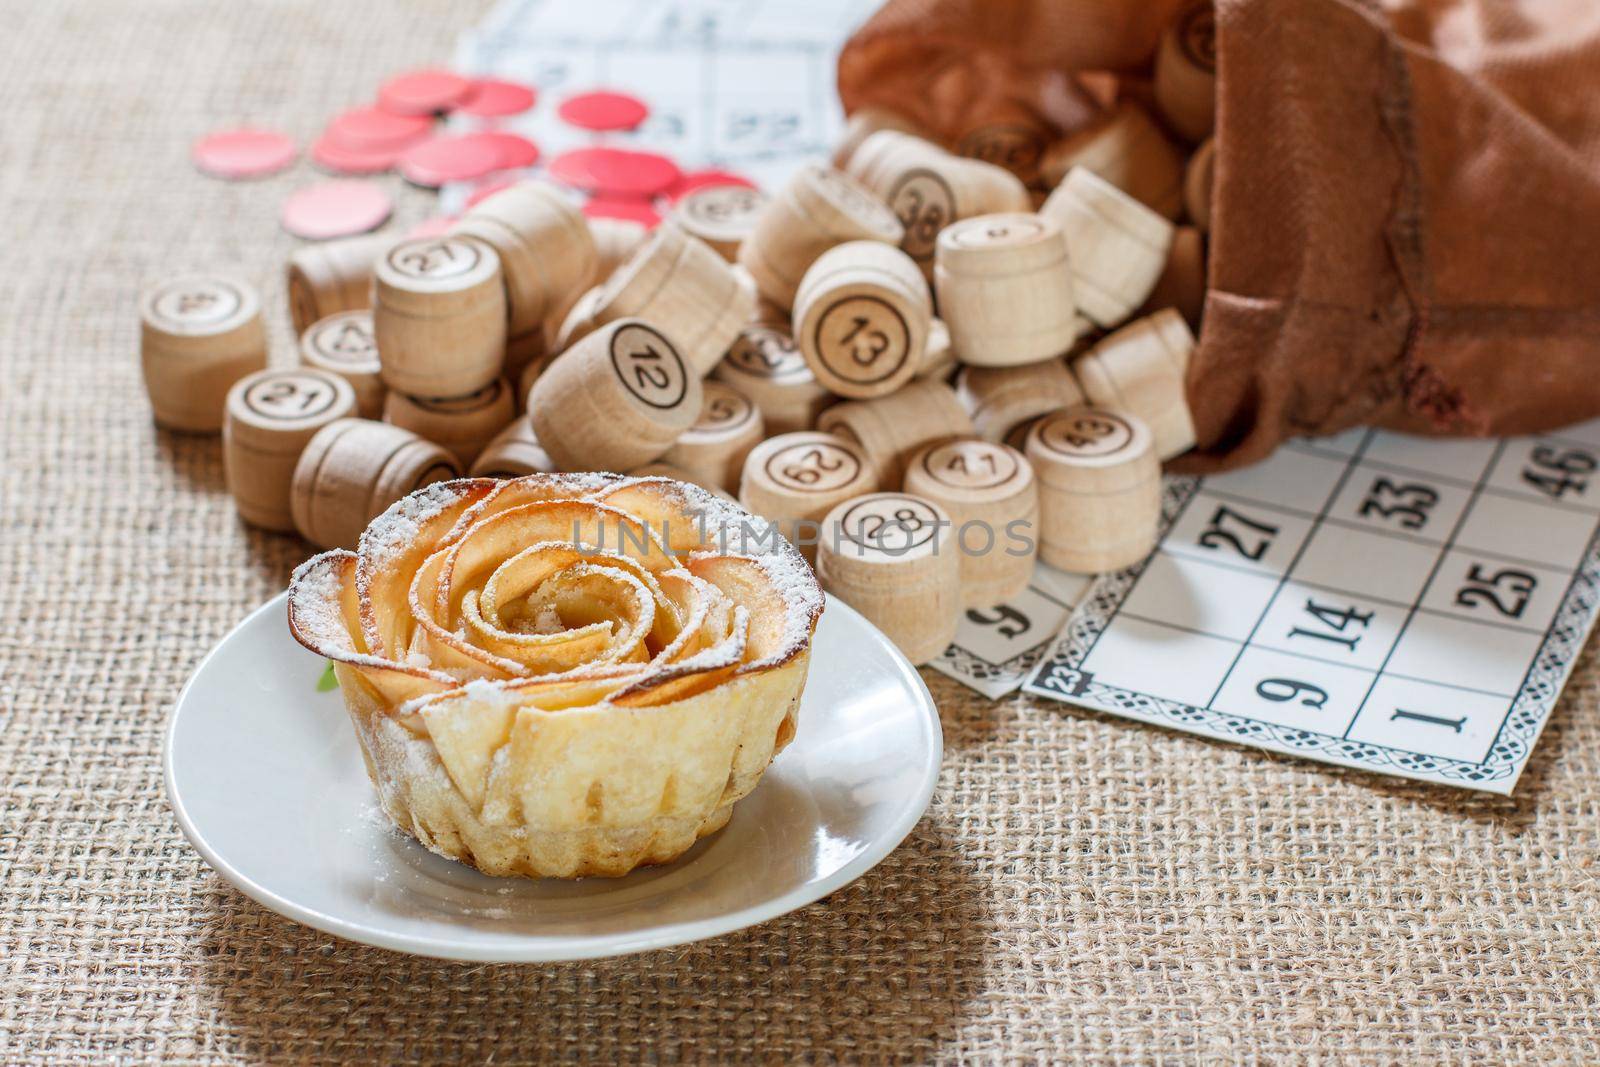 Wooden lotto barrels in brown pouch and game cards for a game in lotto with homemade biscuit in the form of rose on white saucer